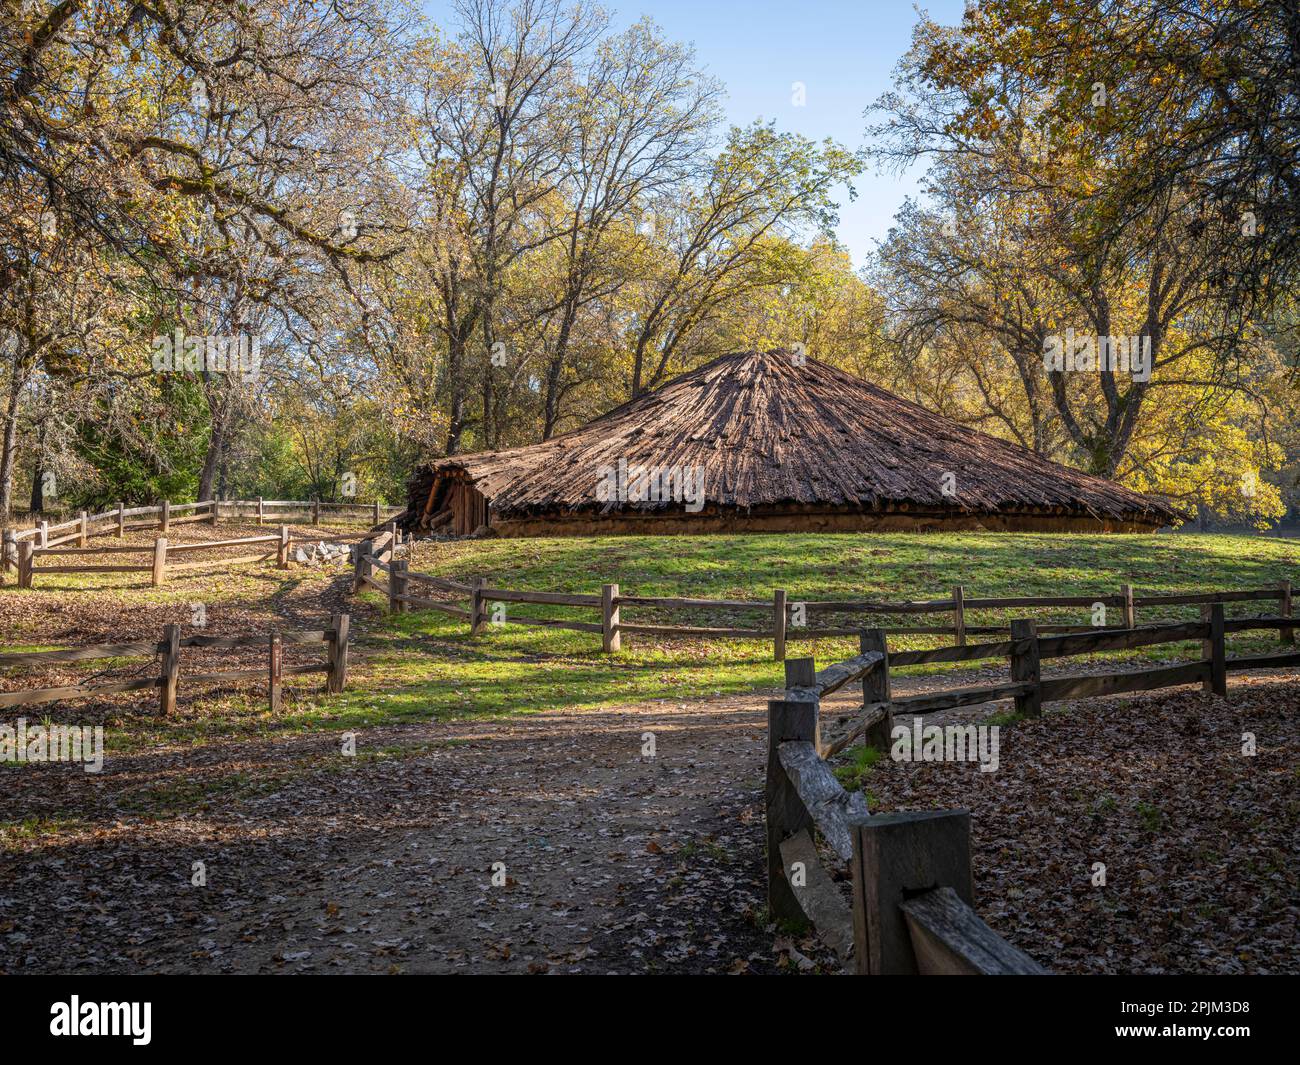 Miwok Roundhouse, Indian Grinding Rock, used for Native American Ceremonies. Stock Photo